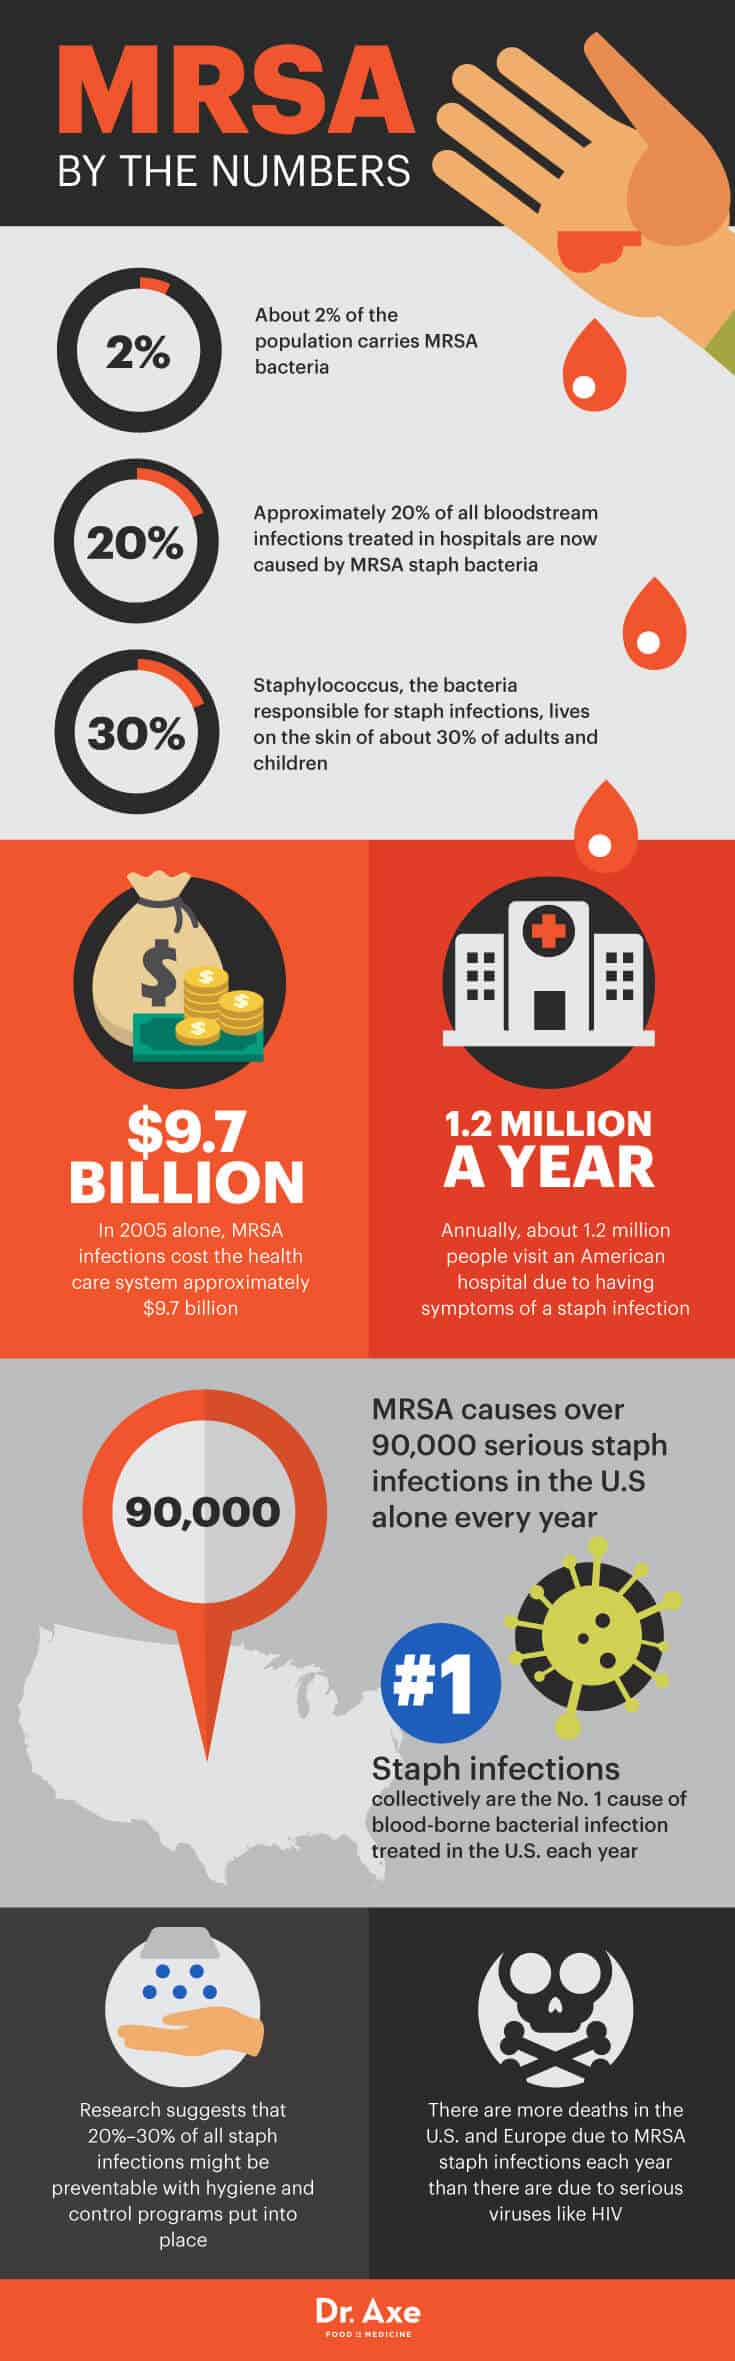 MRSA by the numbers - Dr. Axe